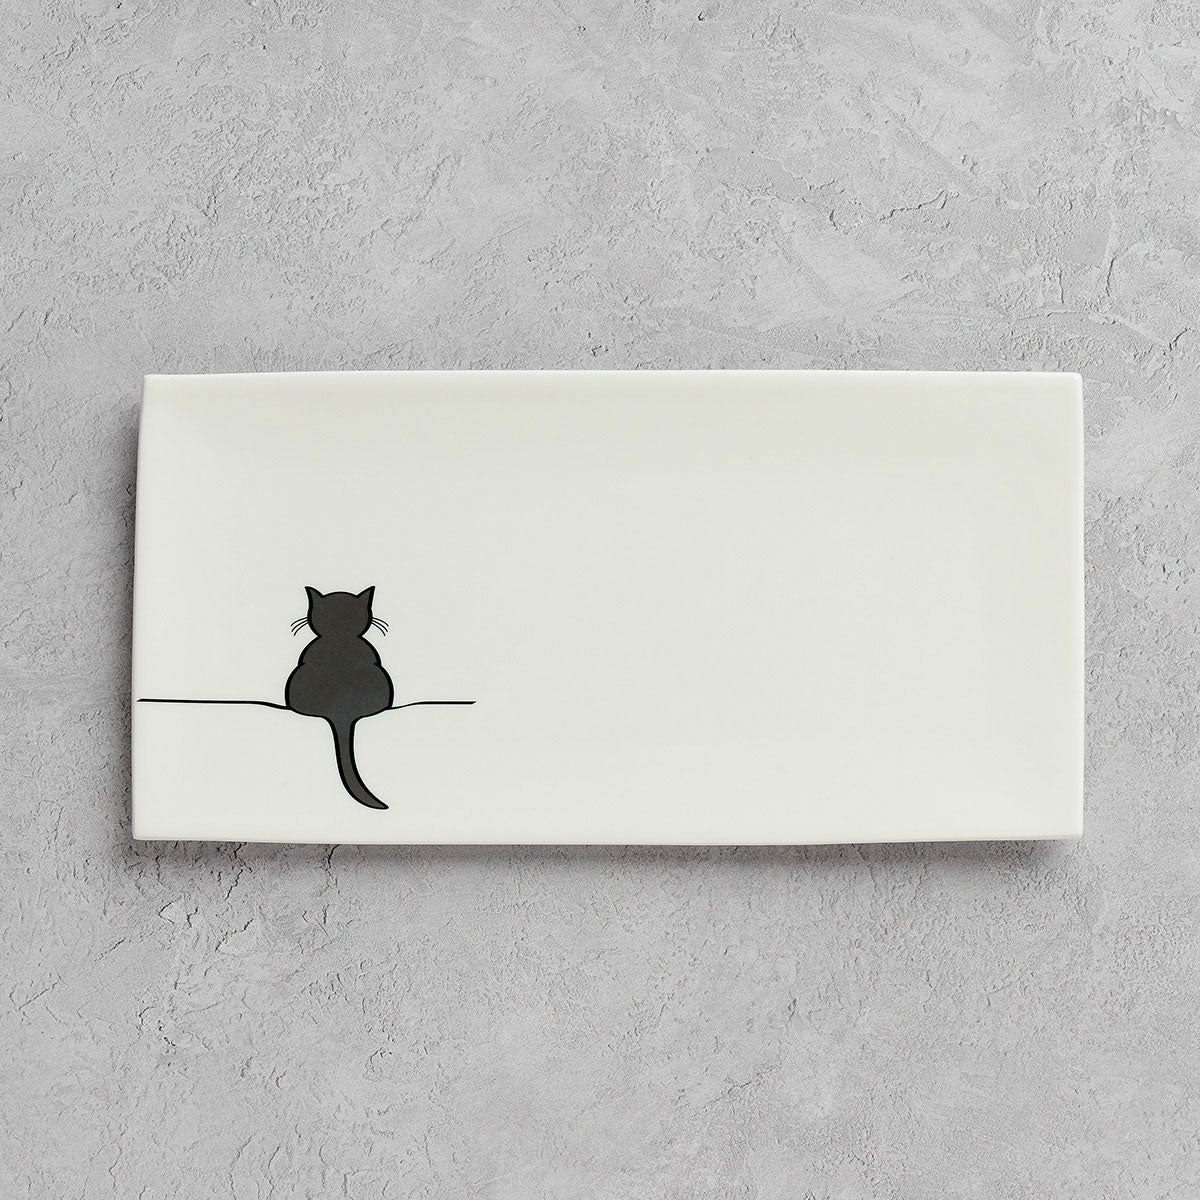 Crouching Cat Serving Tray